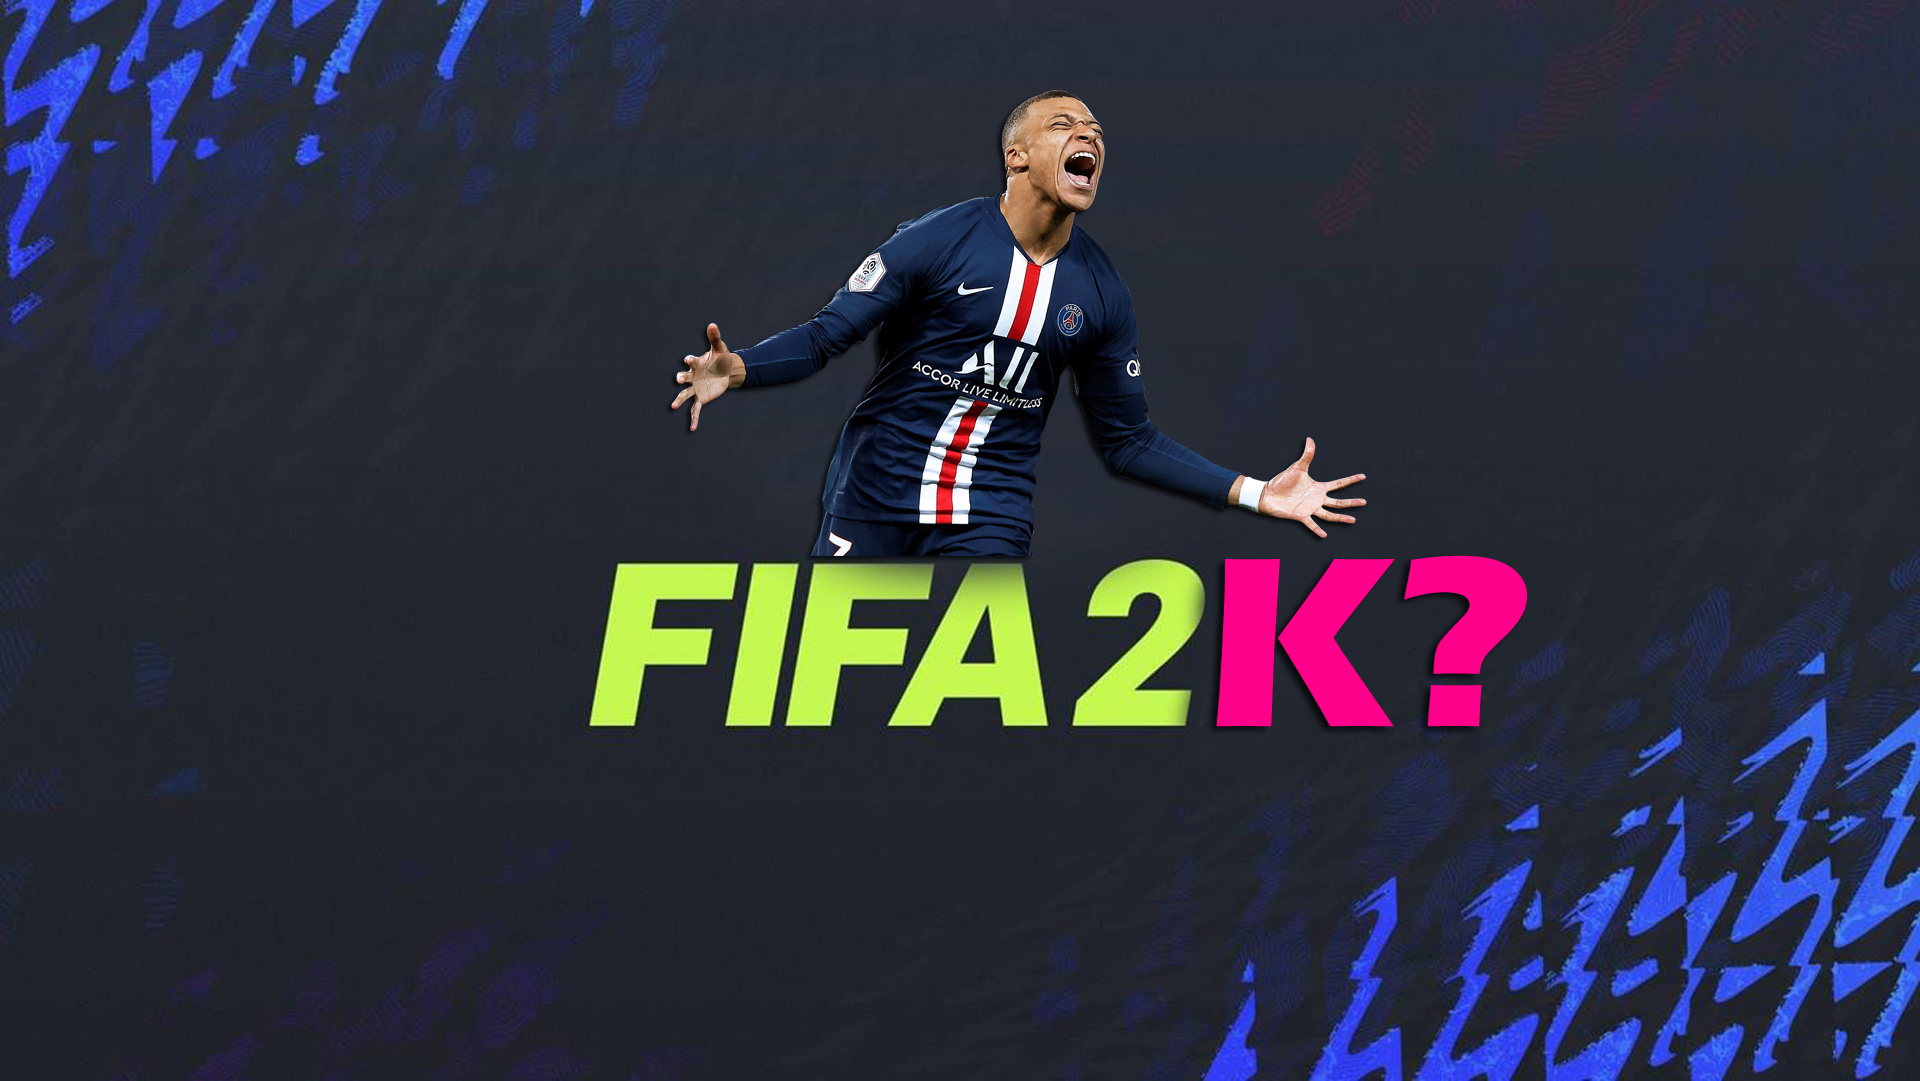 The new FIFA game is coming!